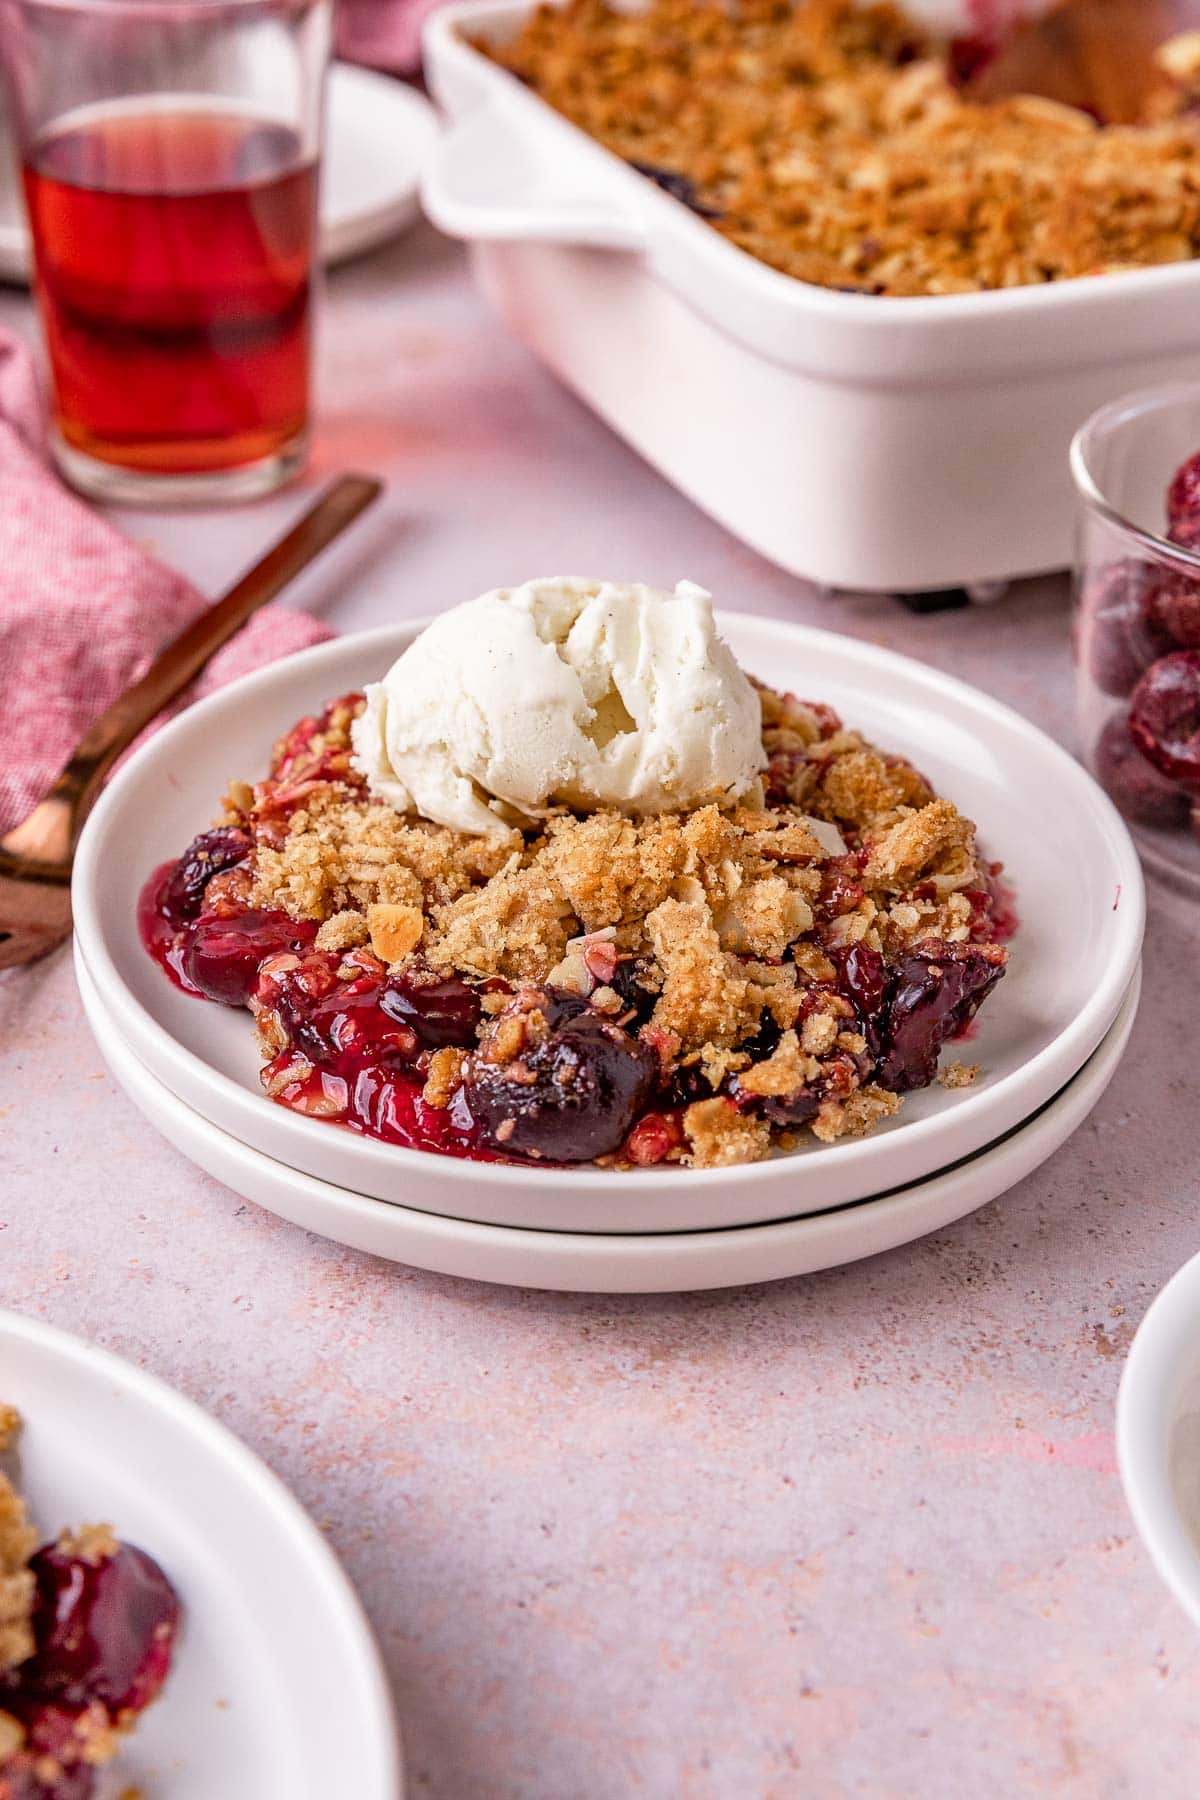 Cherry Crisp prepared and plated with scoop of vanilla ice cream on top